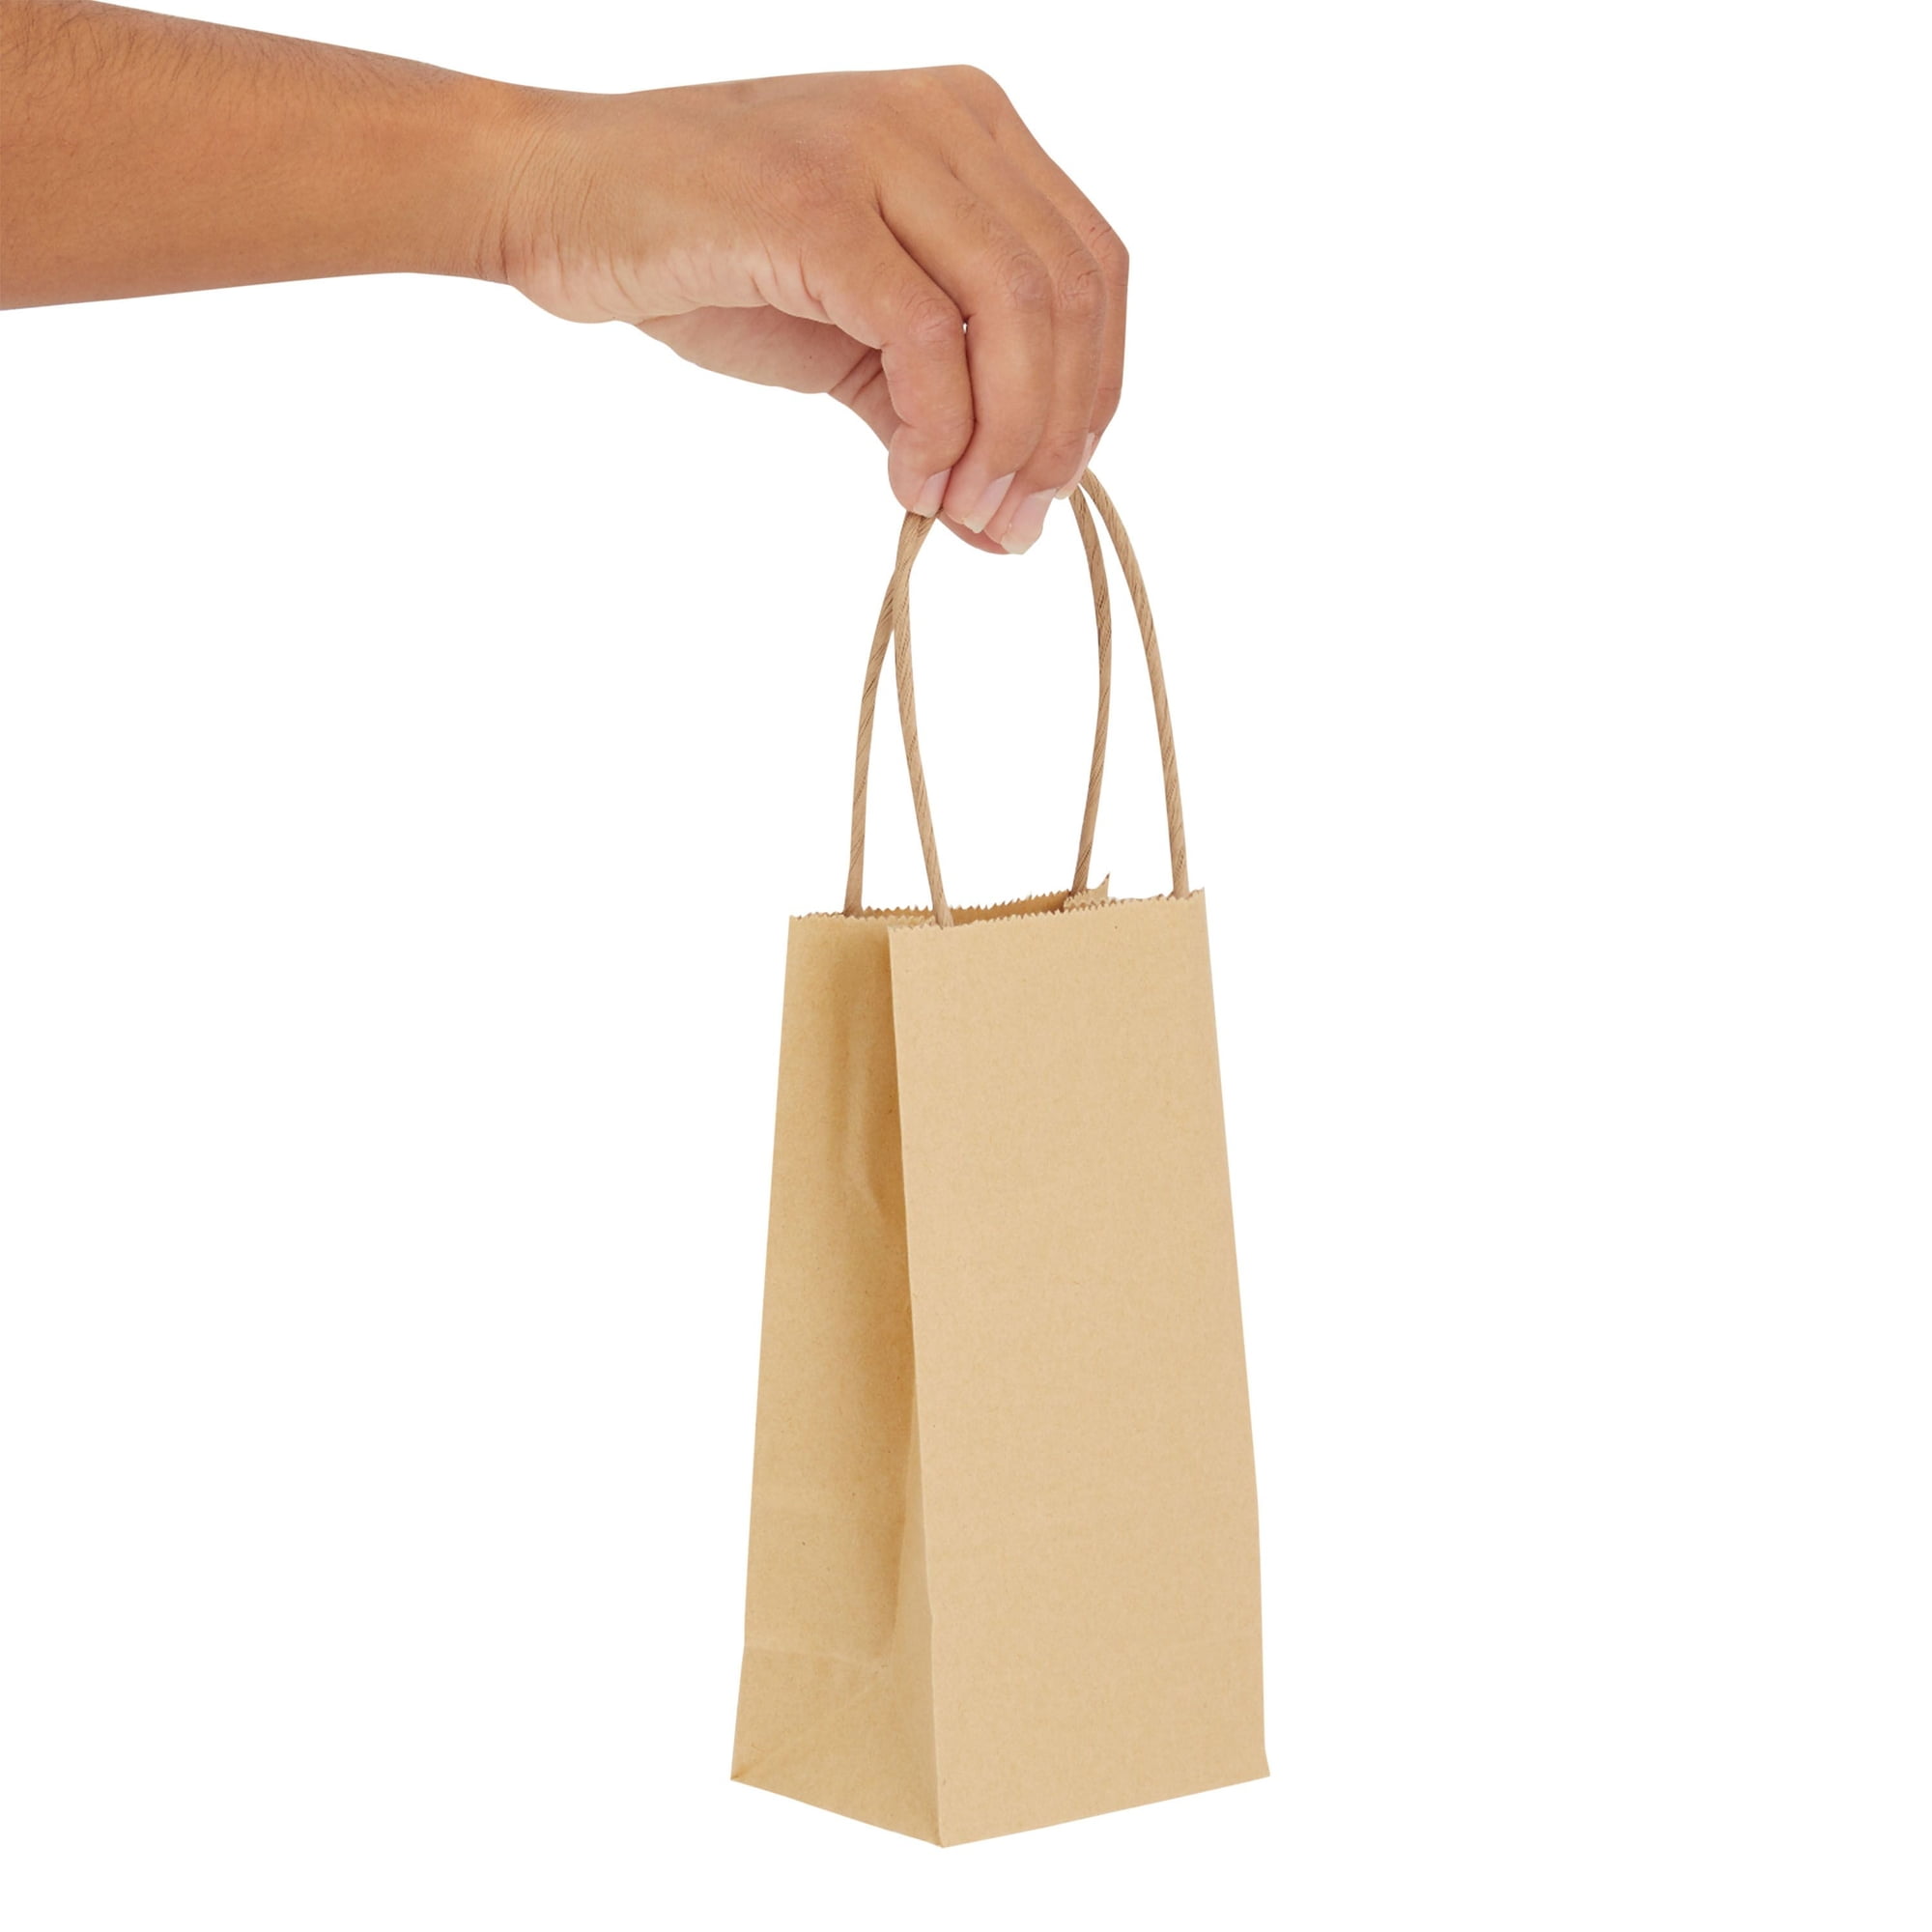 50-Pack Small White Kraft Paper Bag, 6.25x3.5x2.5 in. Party Gift Bags with  Handles, Bulk Retail Shopping Merchandise Bags